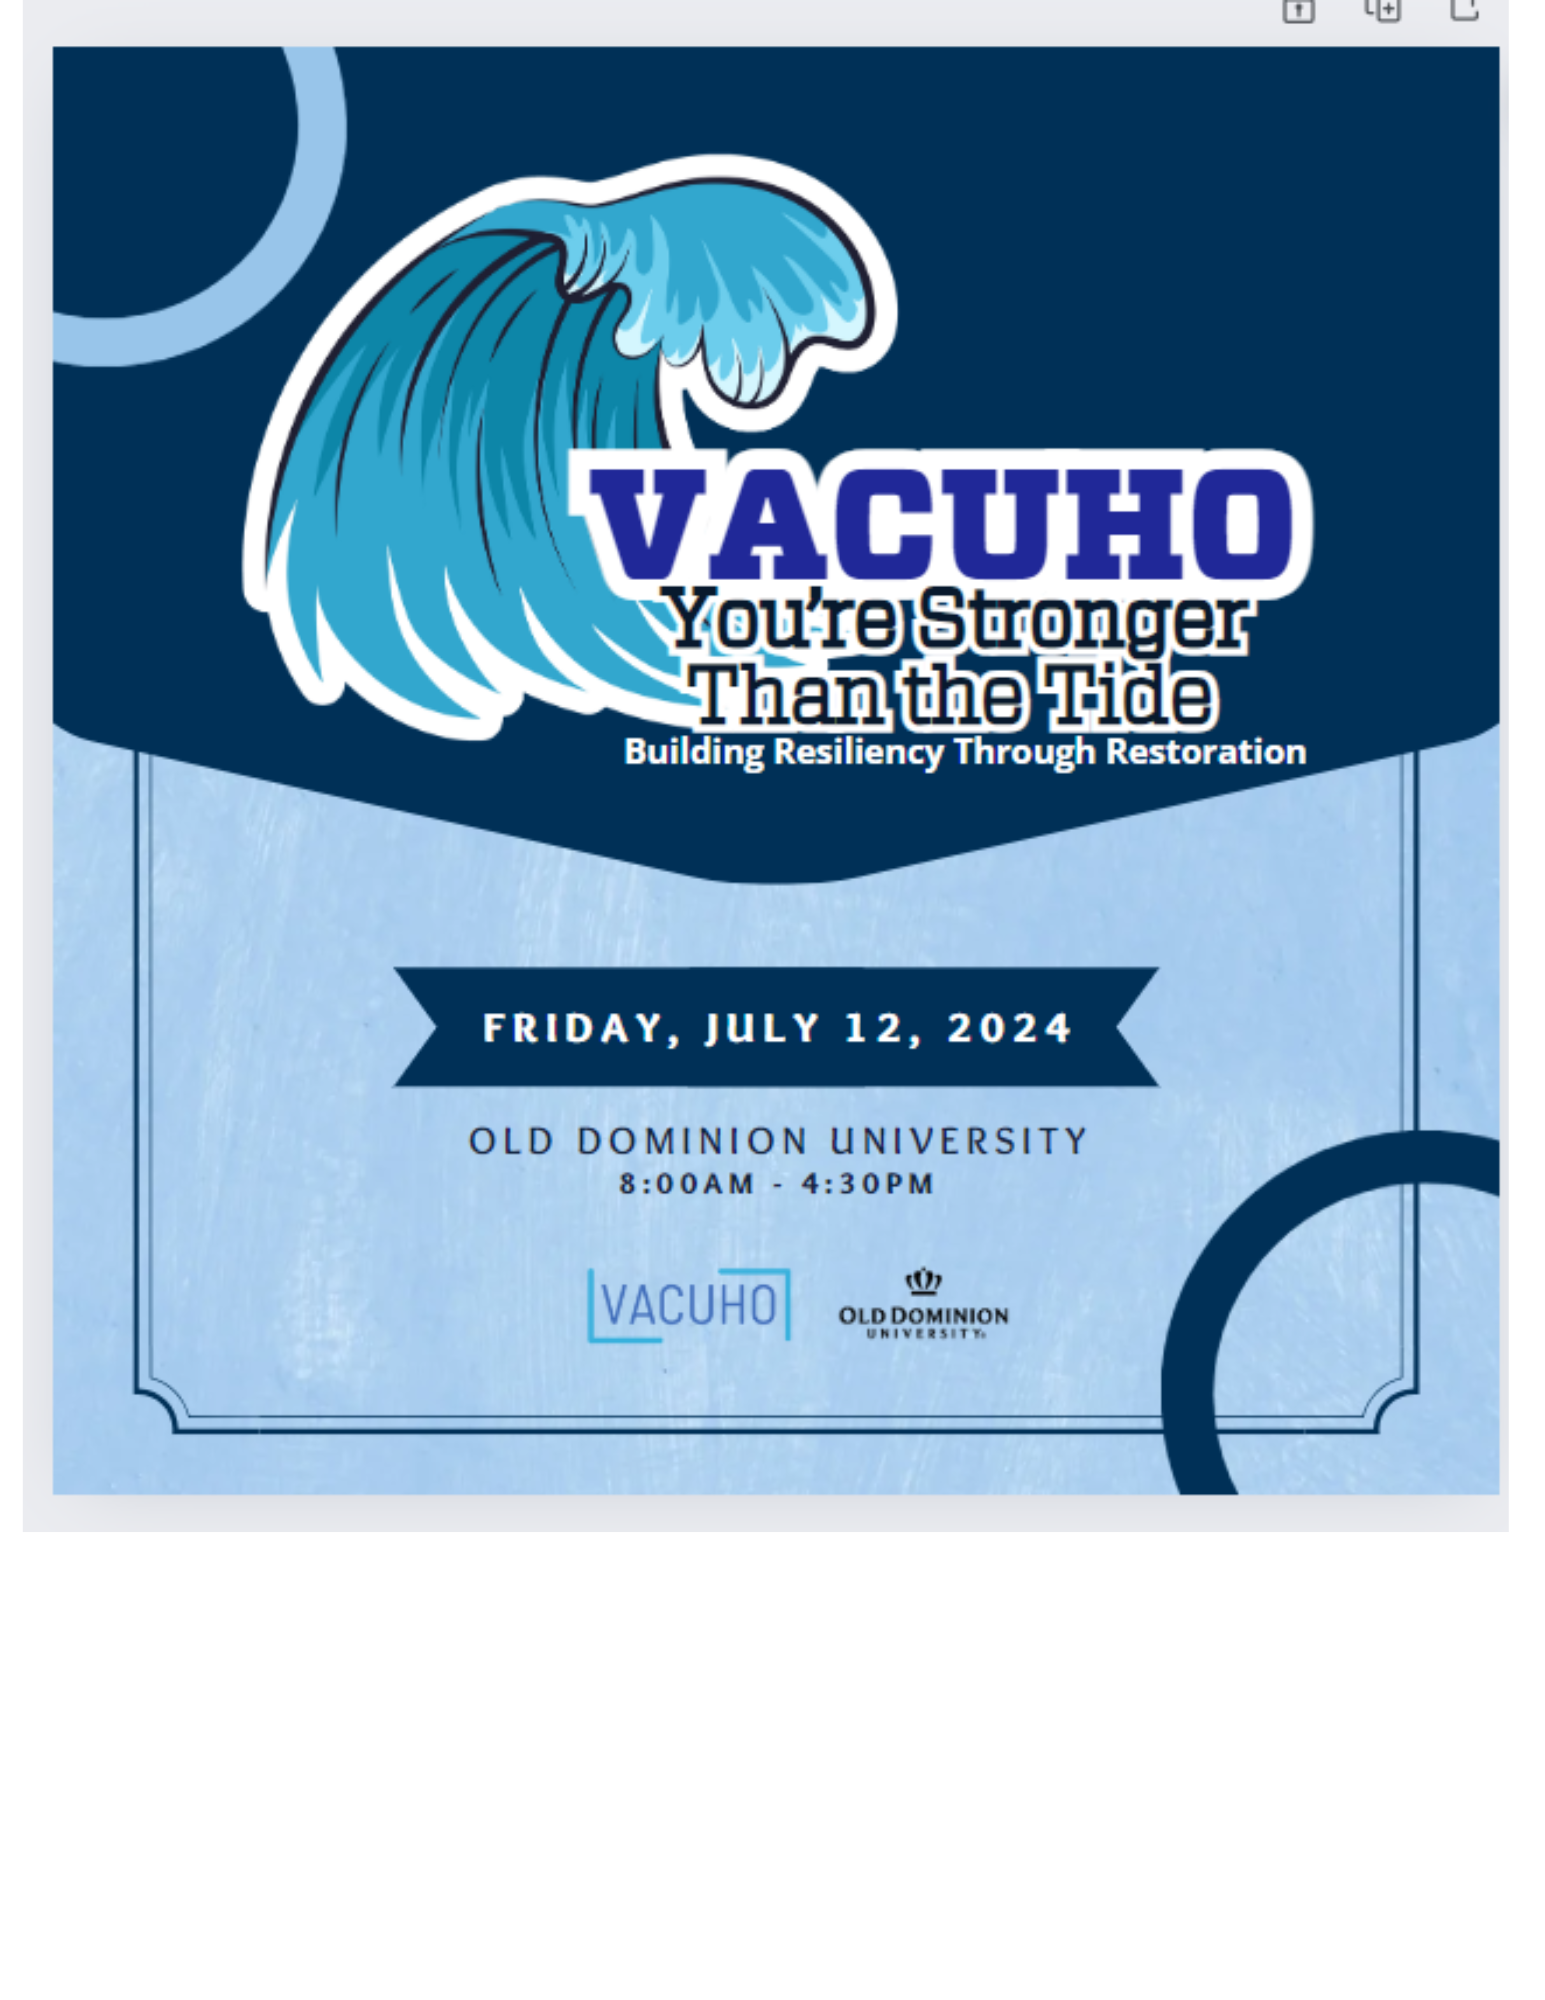 Event promo image for the VACUHO Drive-In Conference